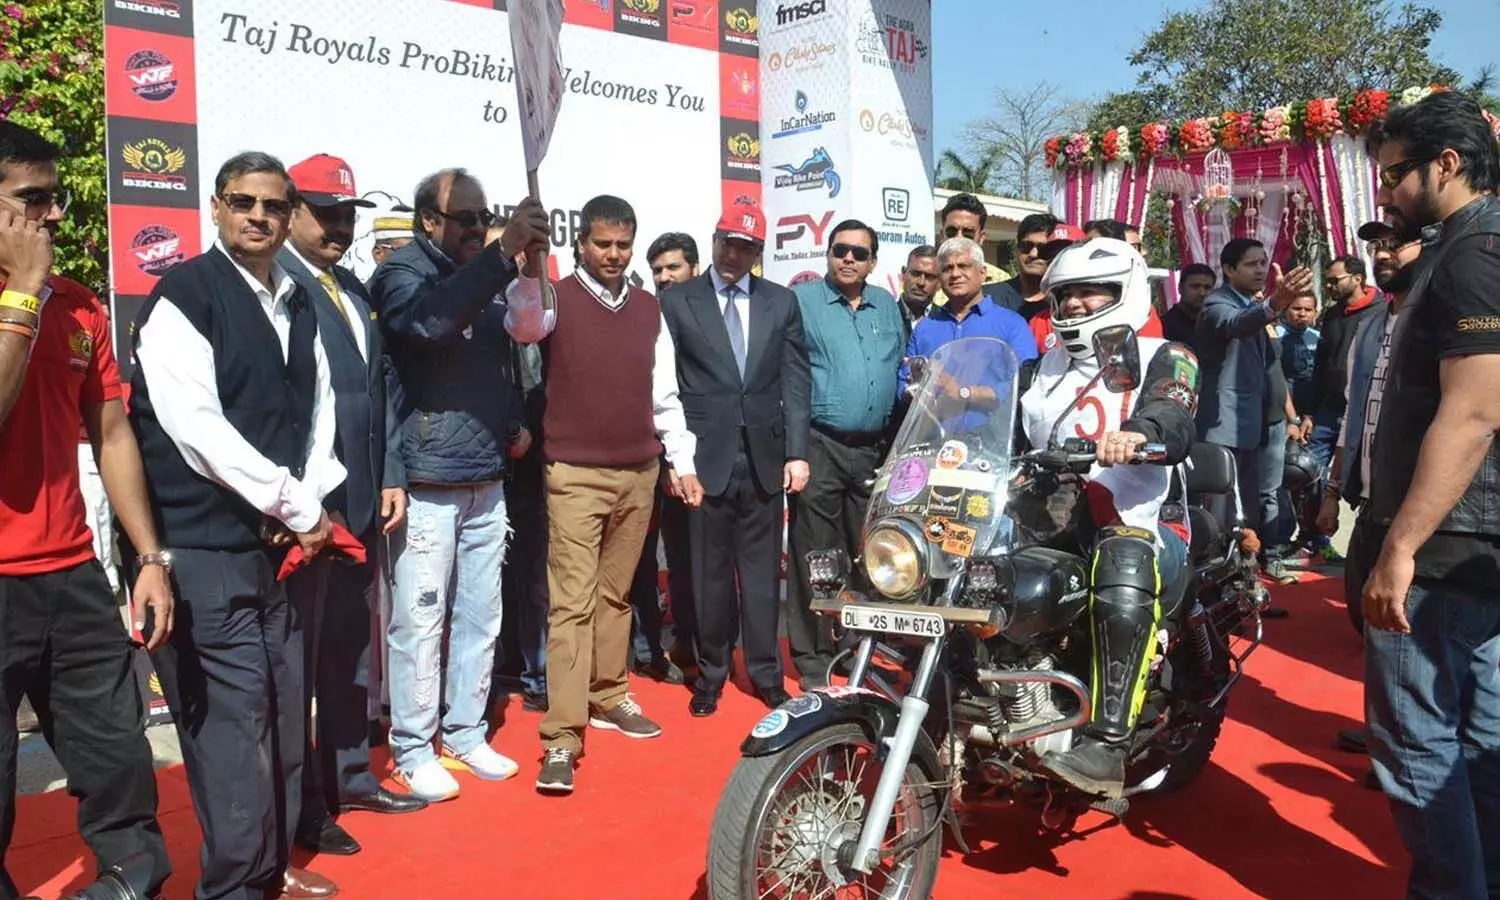 World Motorcycle Day is an exciting motorcycle journey